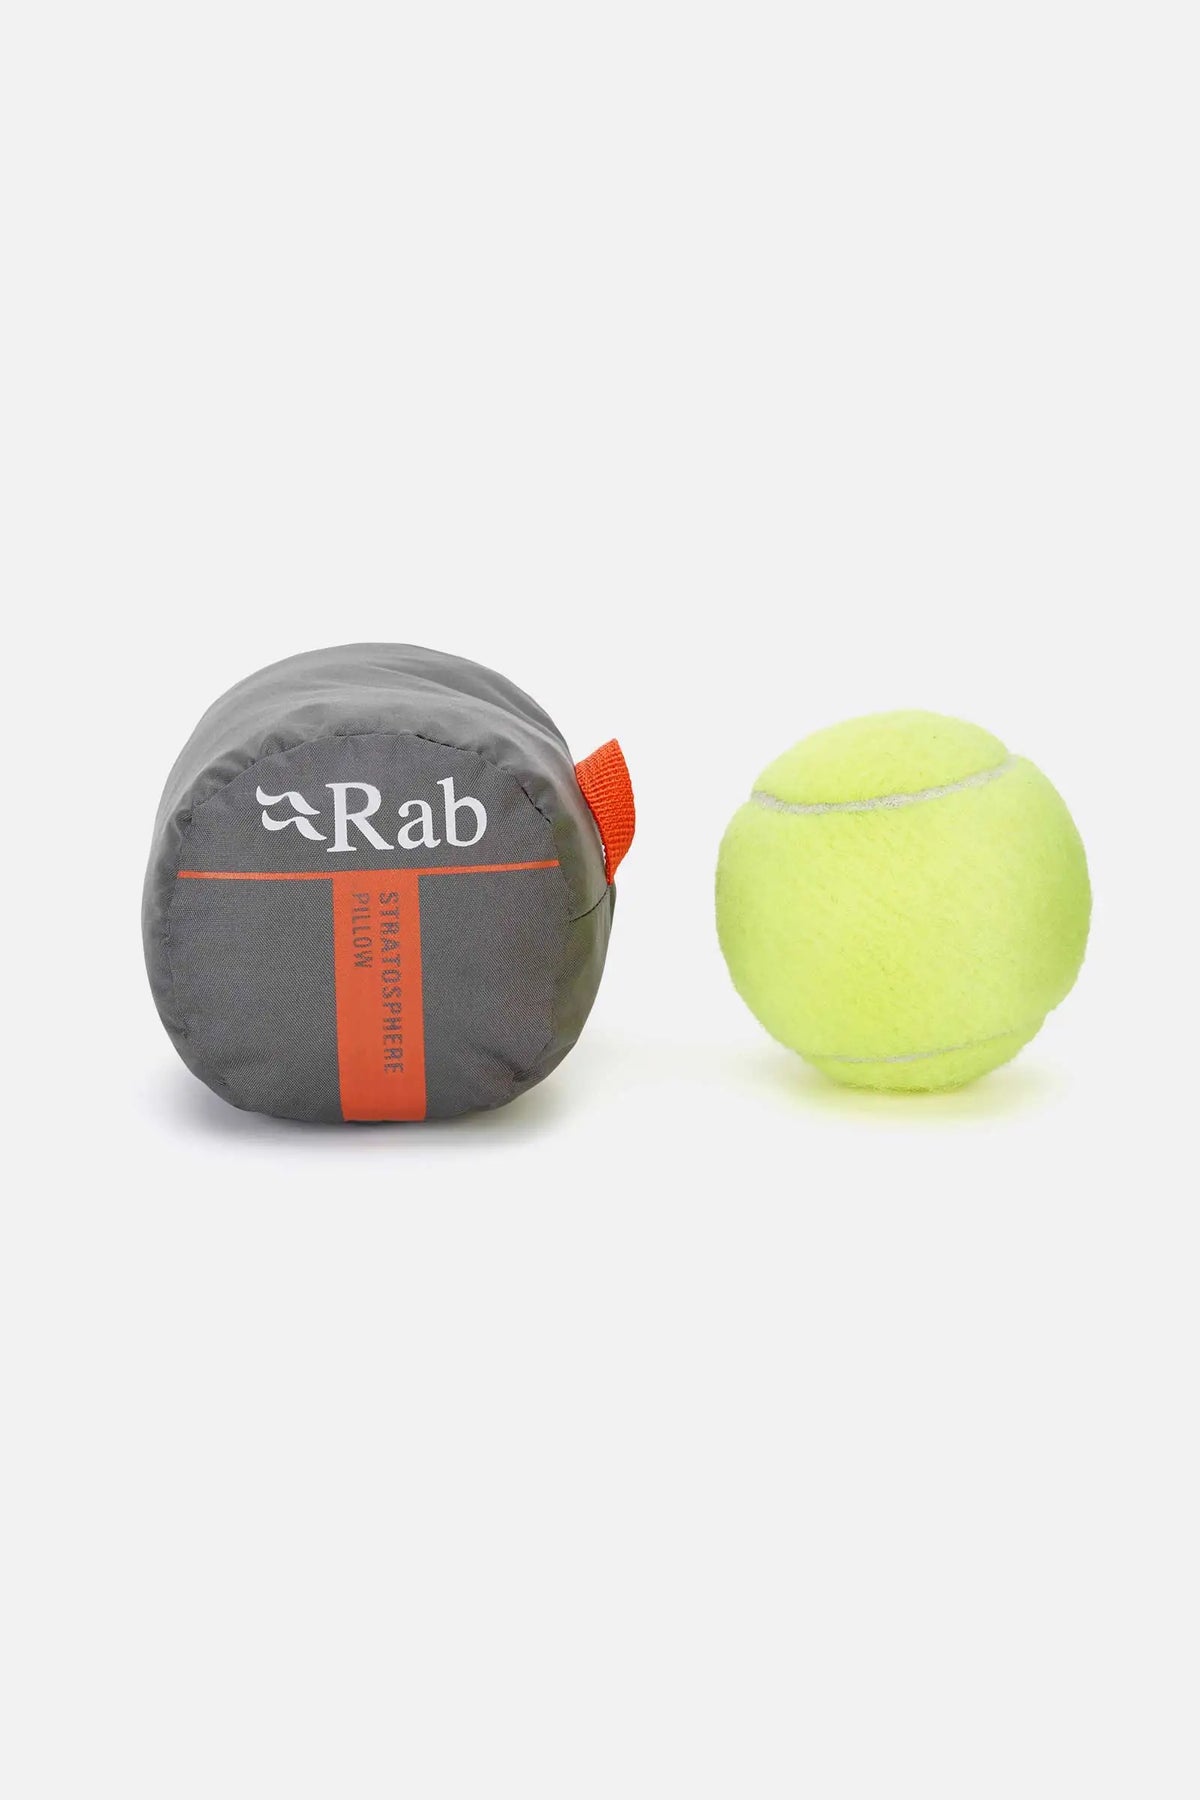 Rab Stratosphere Inflatable Pillow